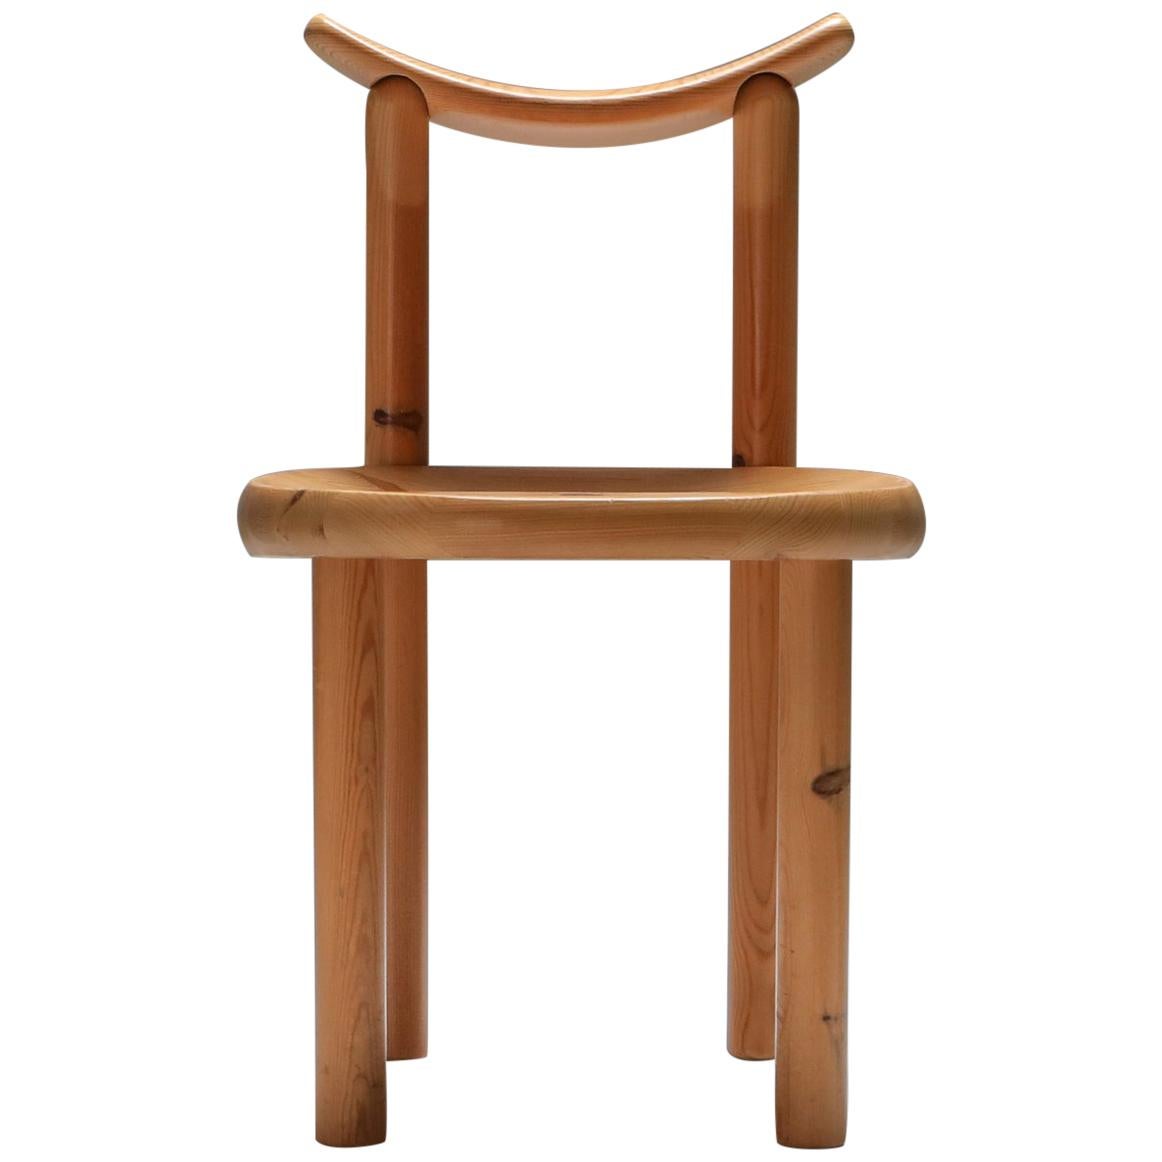 Rainer Daumiller Dining Chairs in Pine